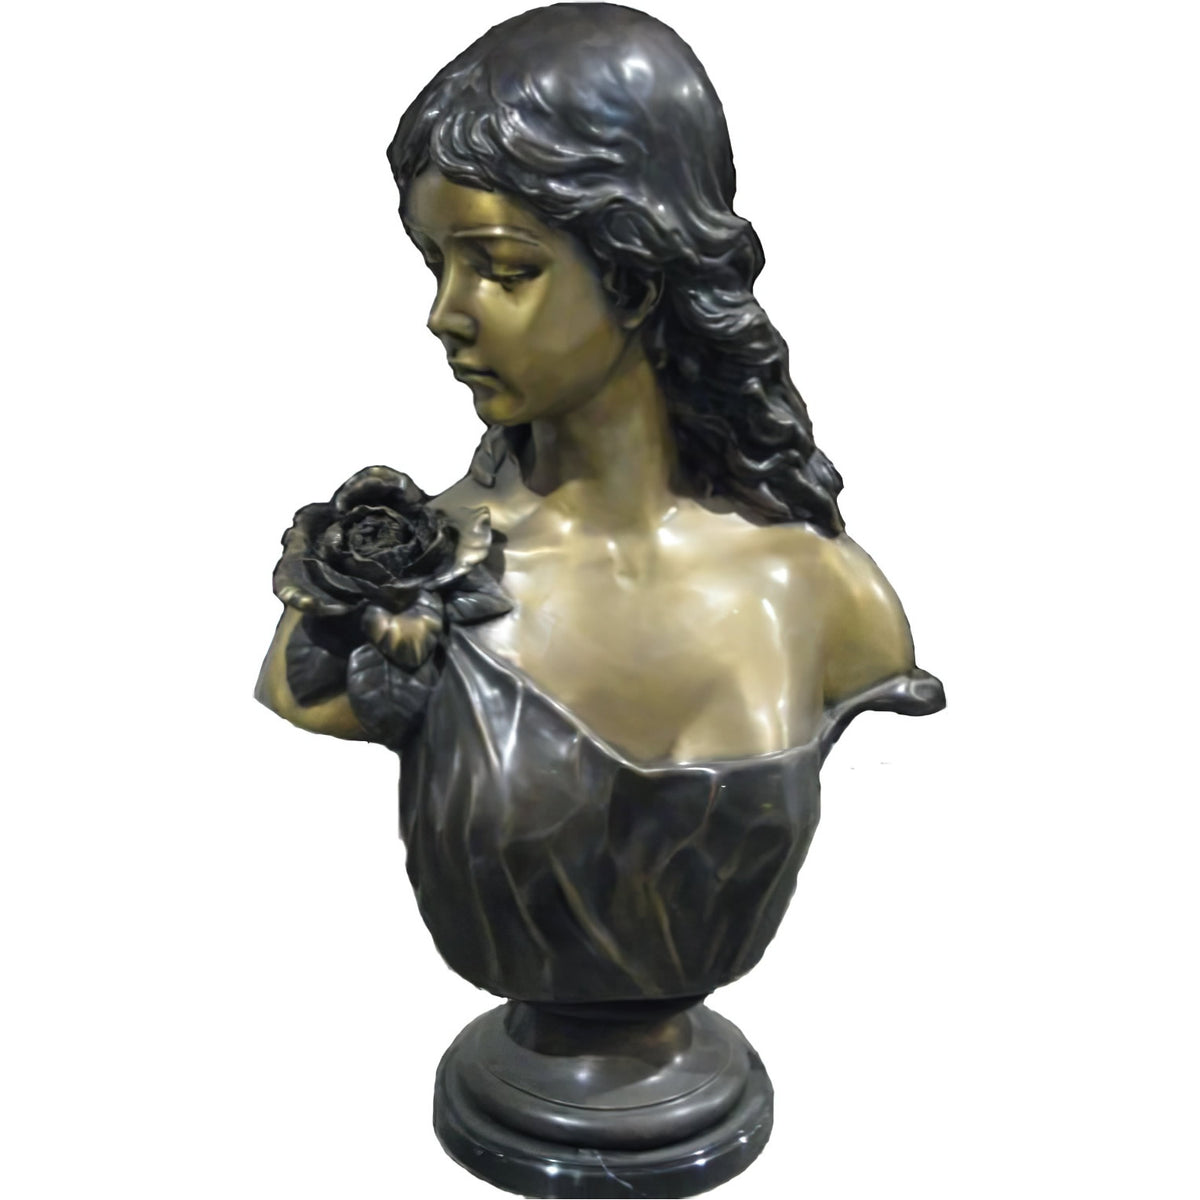 Bust of Cleopatra - Buy a Replica Bust of Cleopatra from Museum Store  Company